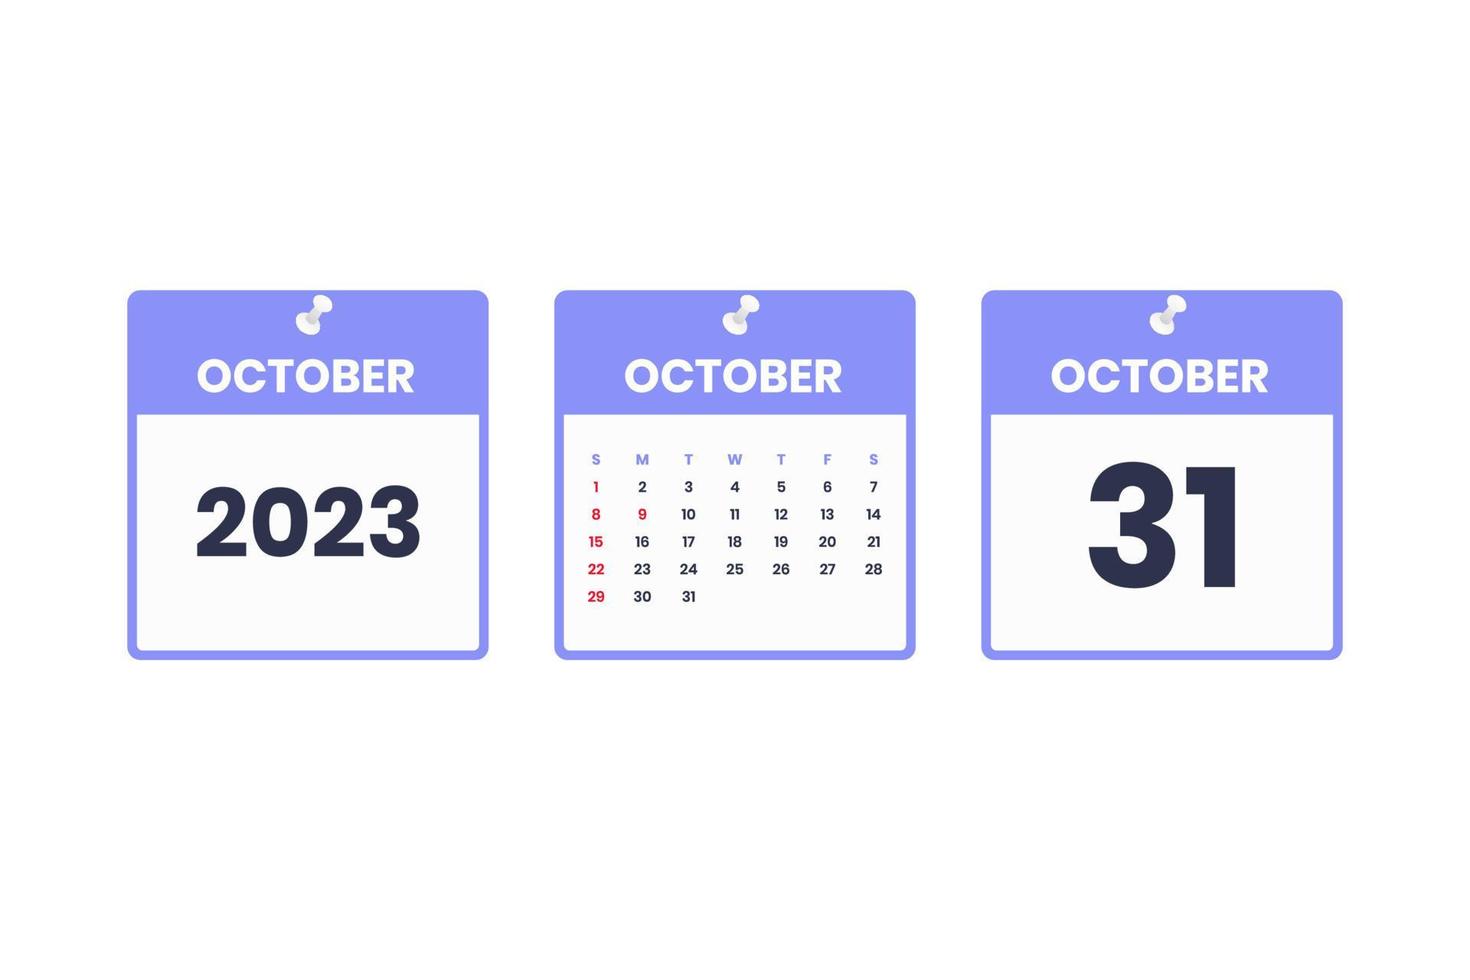 October calendar design. October 31 2023 calendar icon for schedule, appointment, important date concept vector